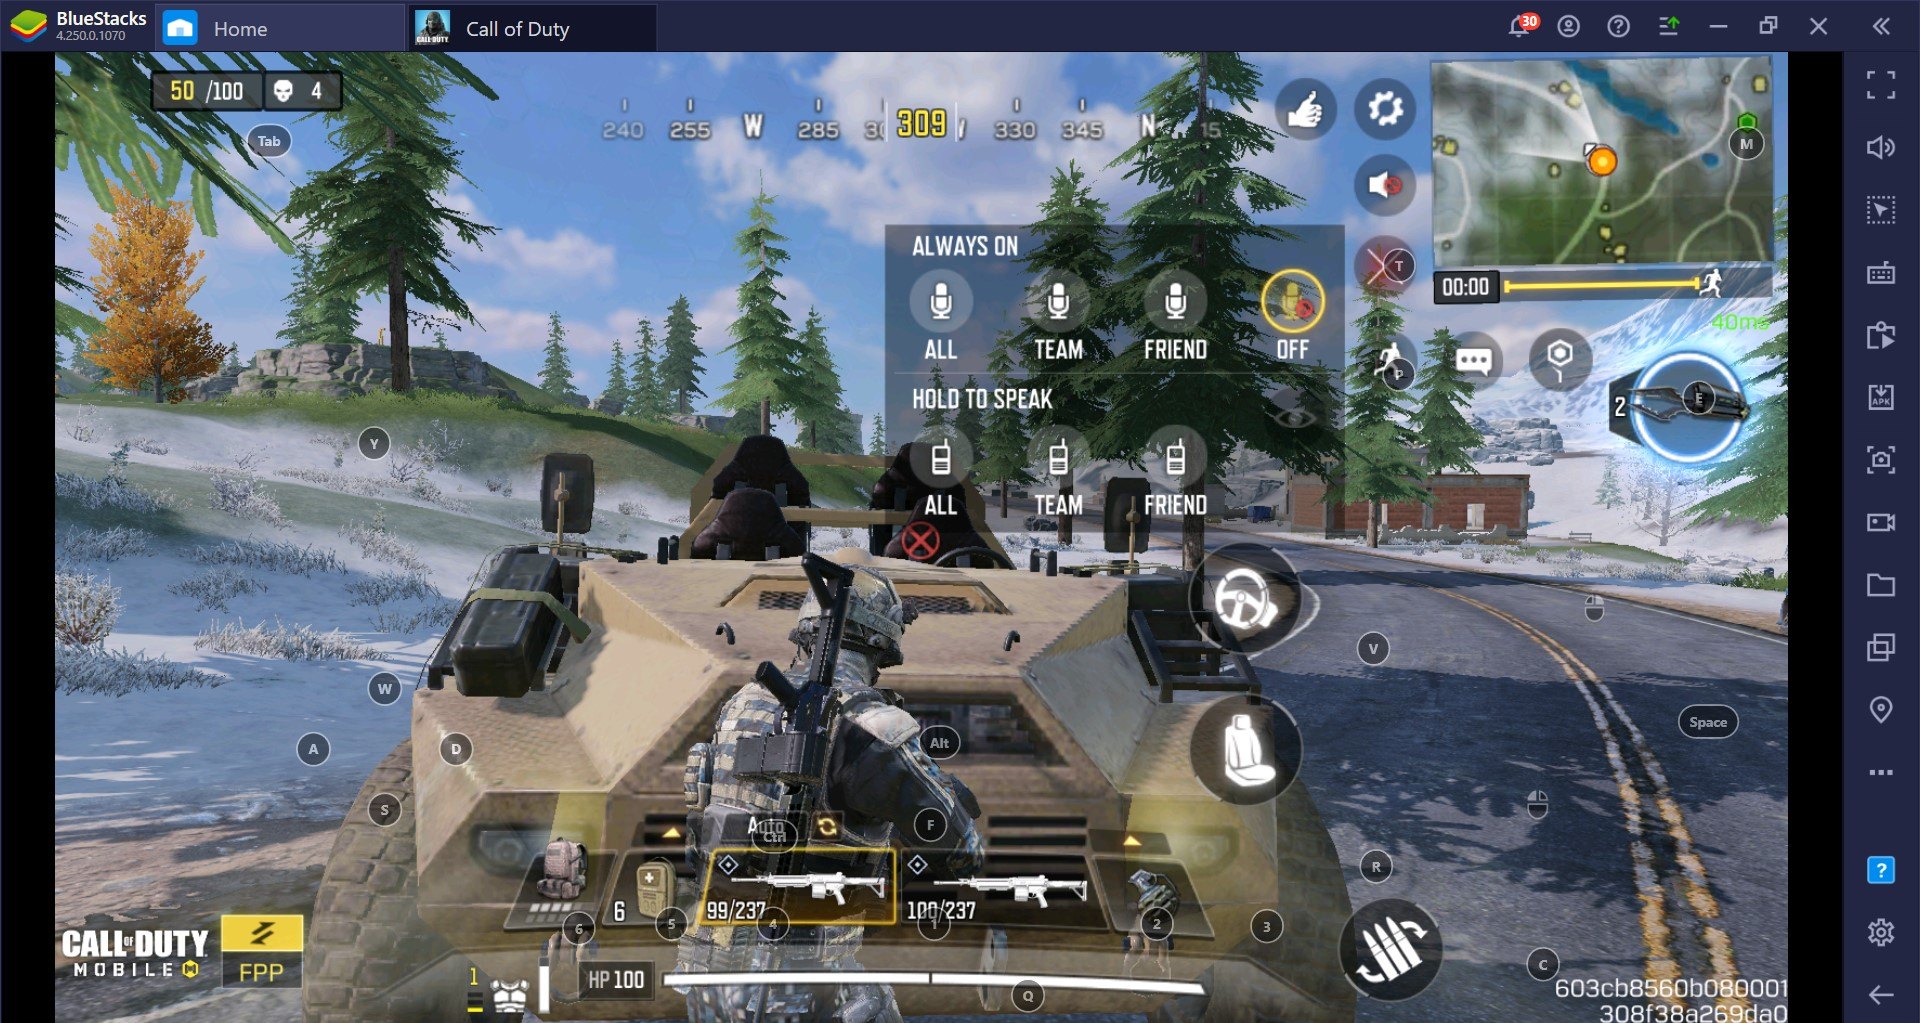 BlueStacks Guide to Vehicles in Call of Duty: Mobile